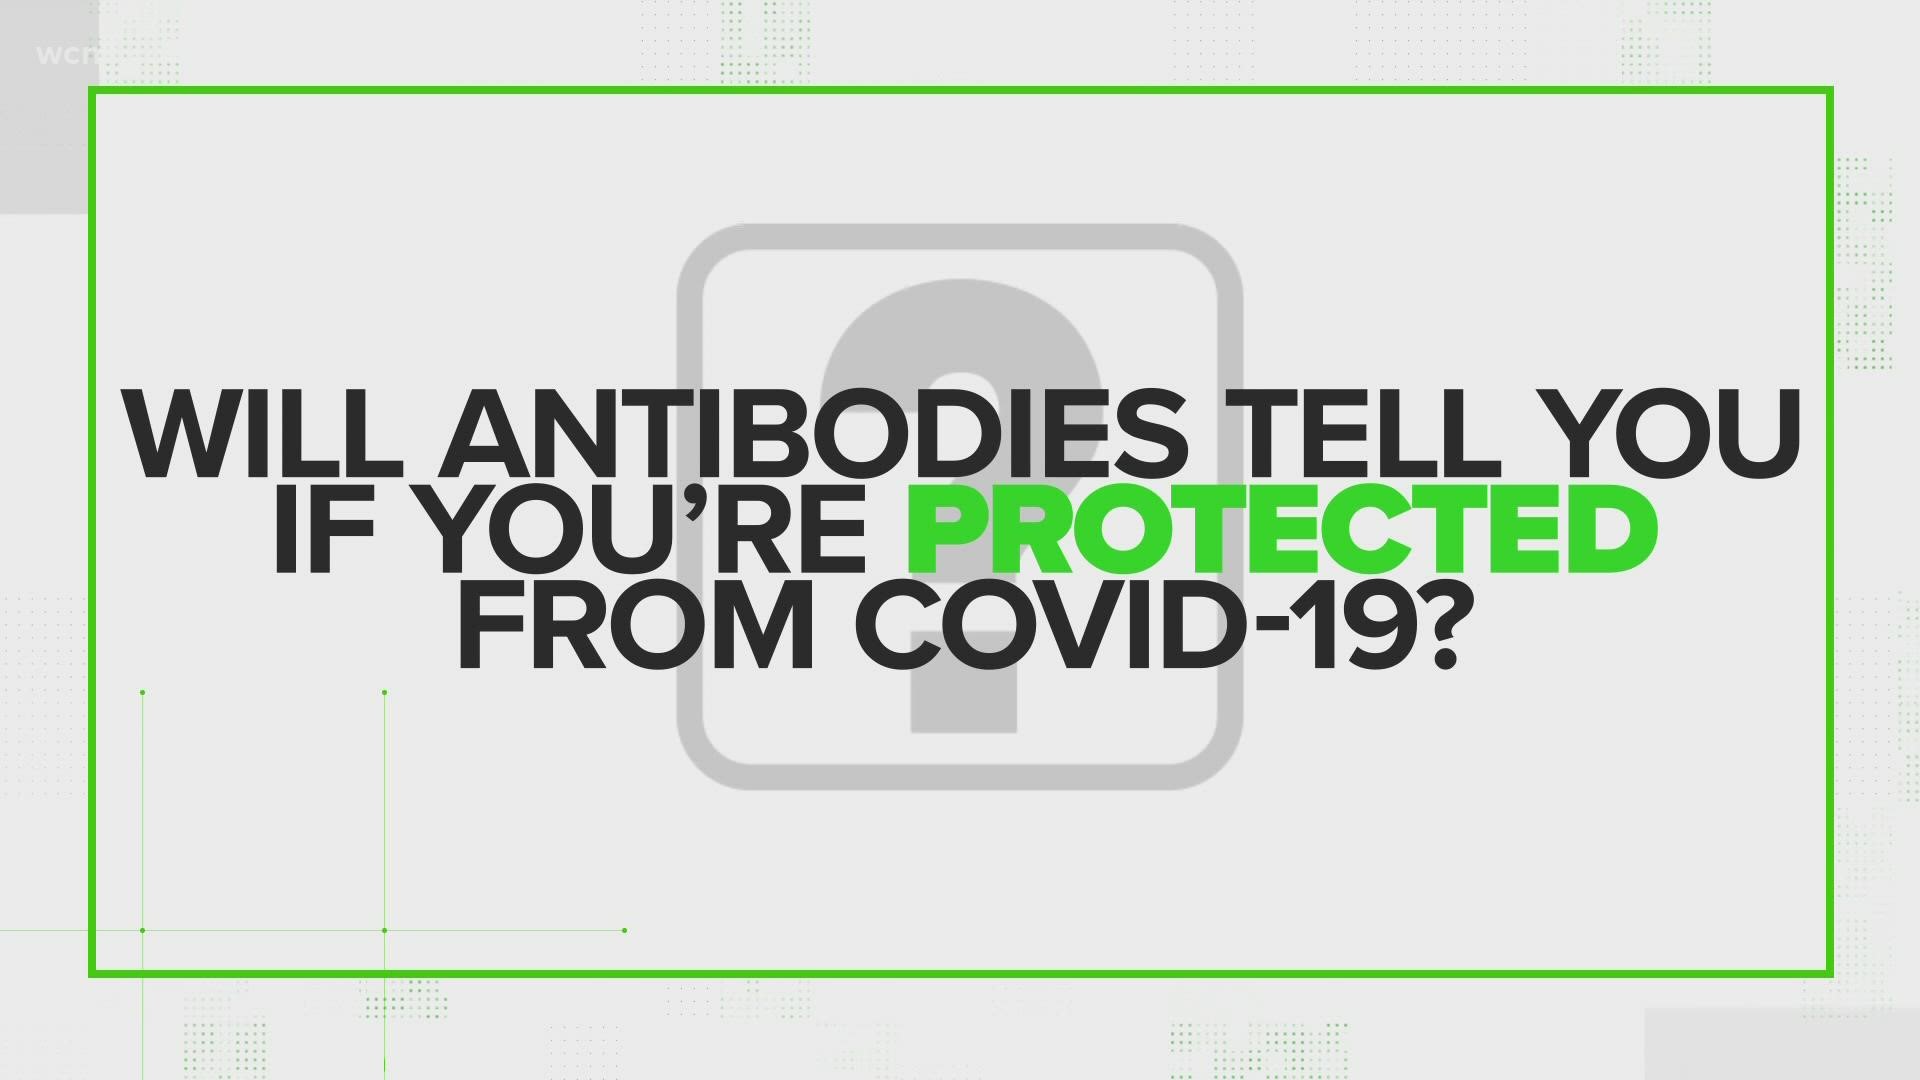 Many questions and claims about antibodies are circulating online. If you have antibodies, with or without a vaccine, are you protected from catching the virus?